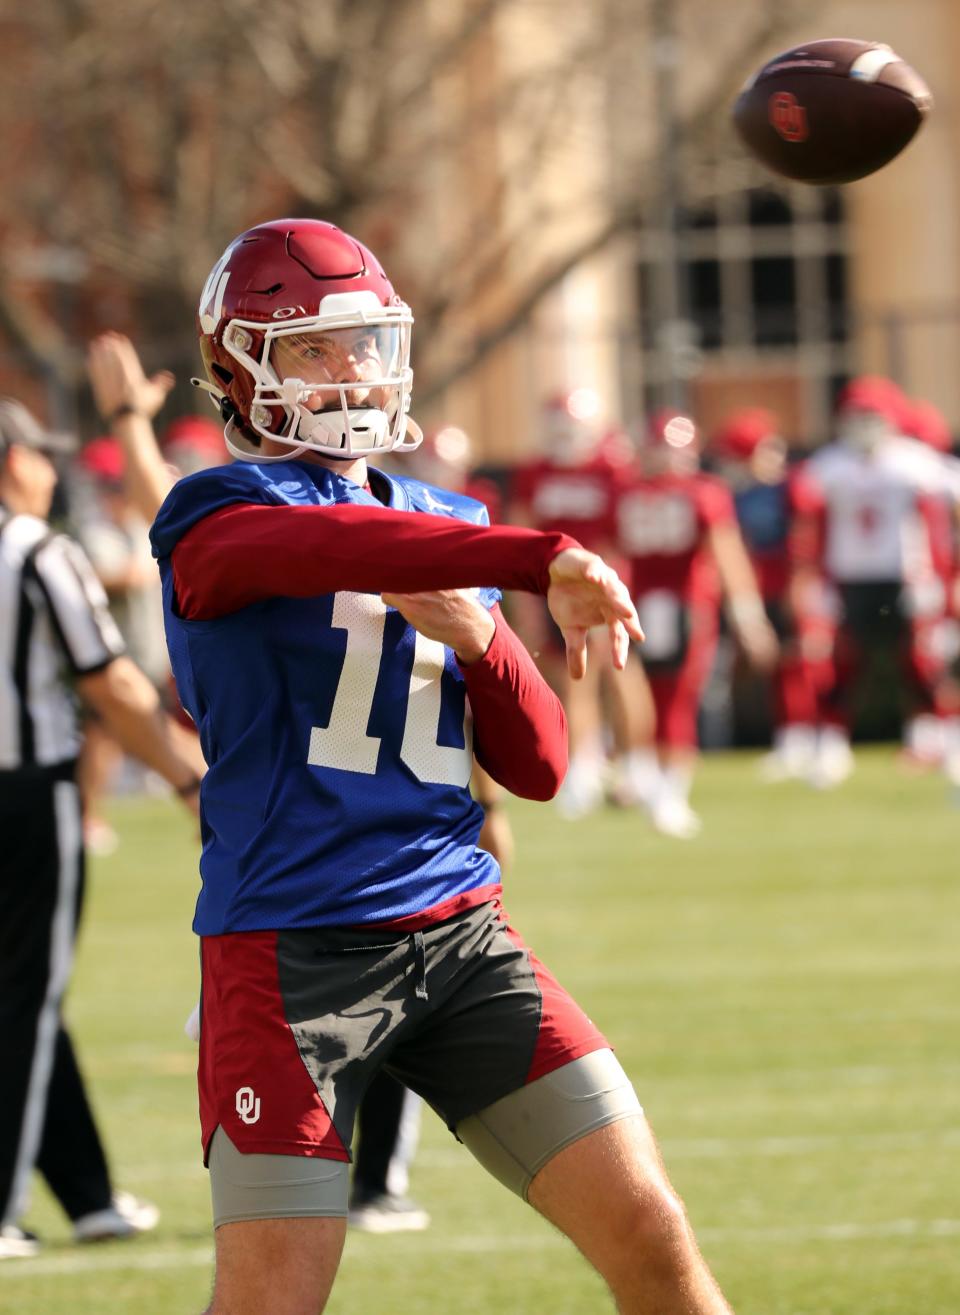 Quarterback Jackson Arnold goes through drills as the University of Oklahoma Sooners (OU) college football team holds spring practice outside of Gaylord Family/Oklahoma Memorial Stadium on  March 21, 2023 in Norman, Okla.  [Steve Sisney/For The Oklahoman]